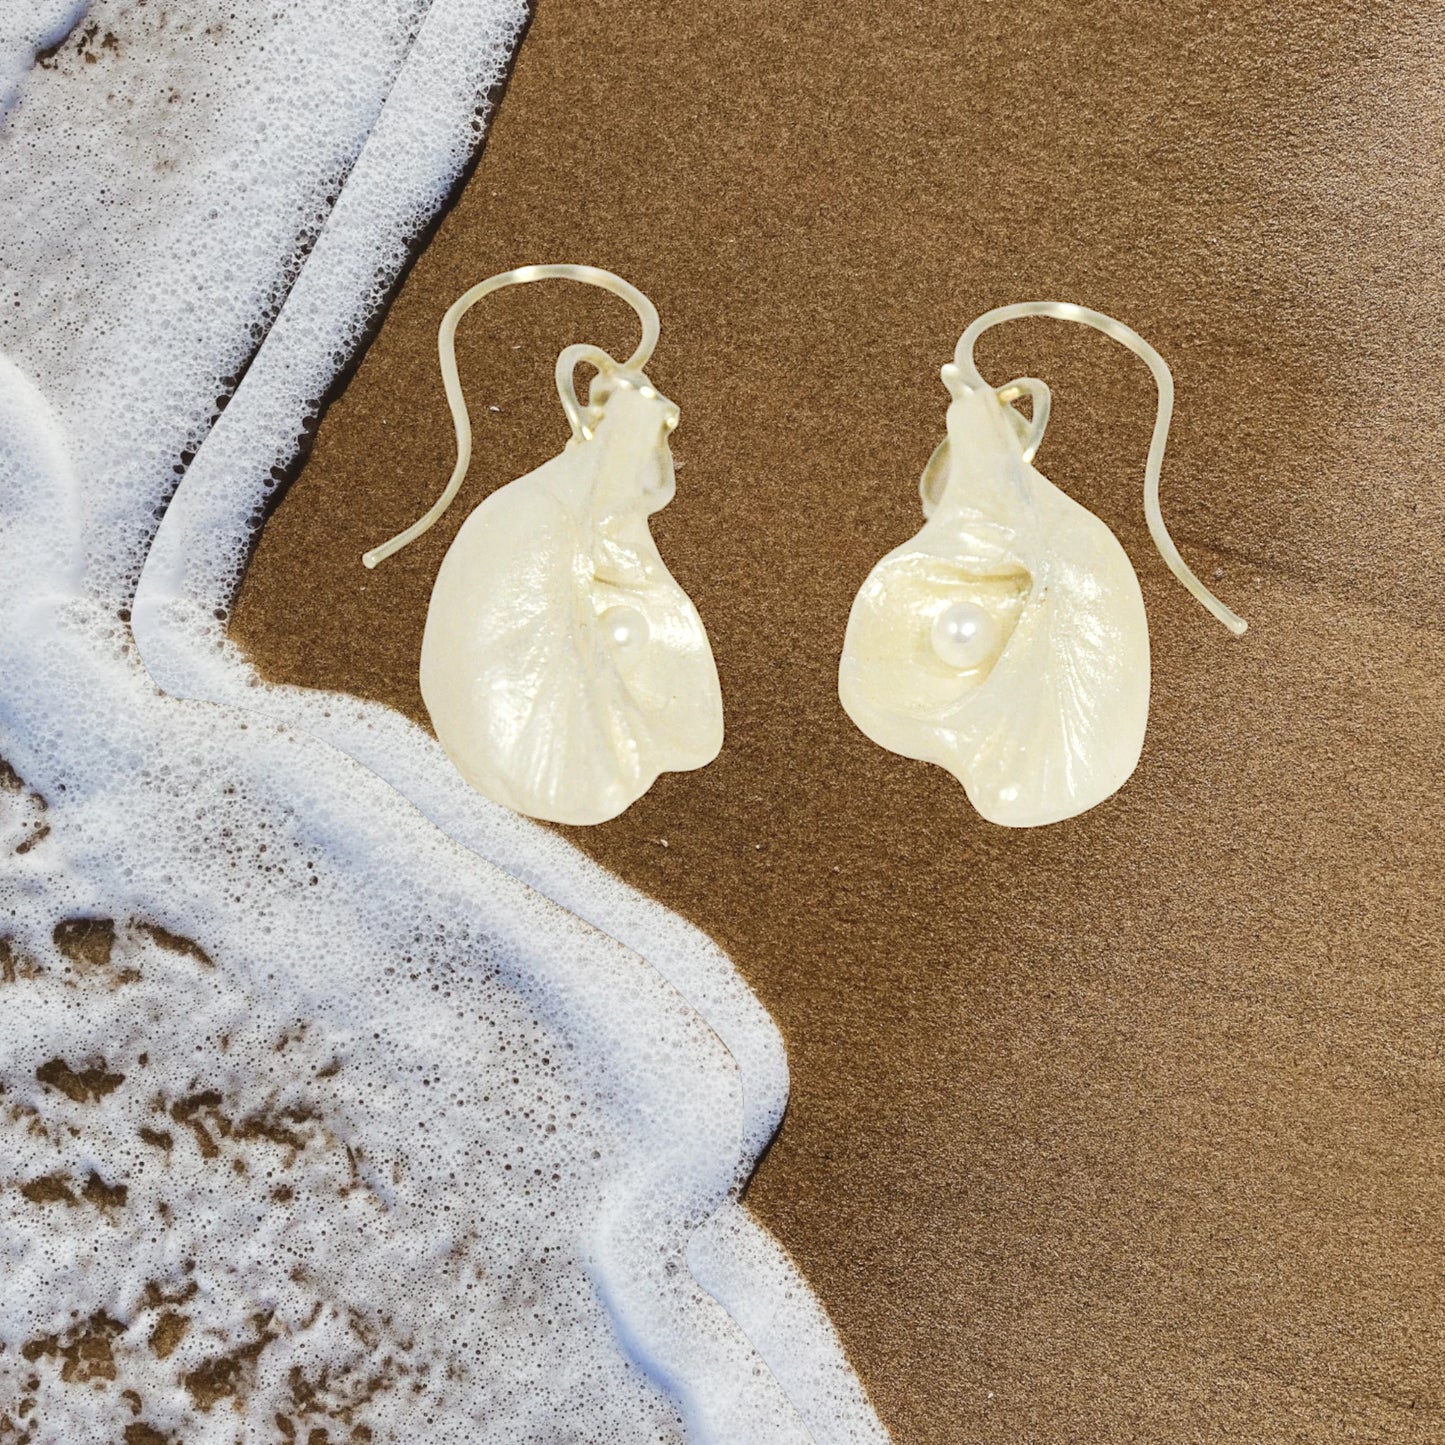 Harmony Earrings made of natural seashells and real freshwater pearls.  The earrings are shown laying on the sand ocean wave.